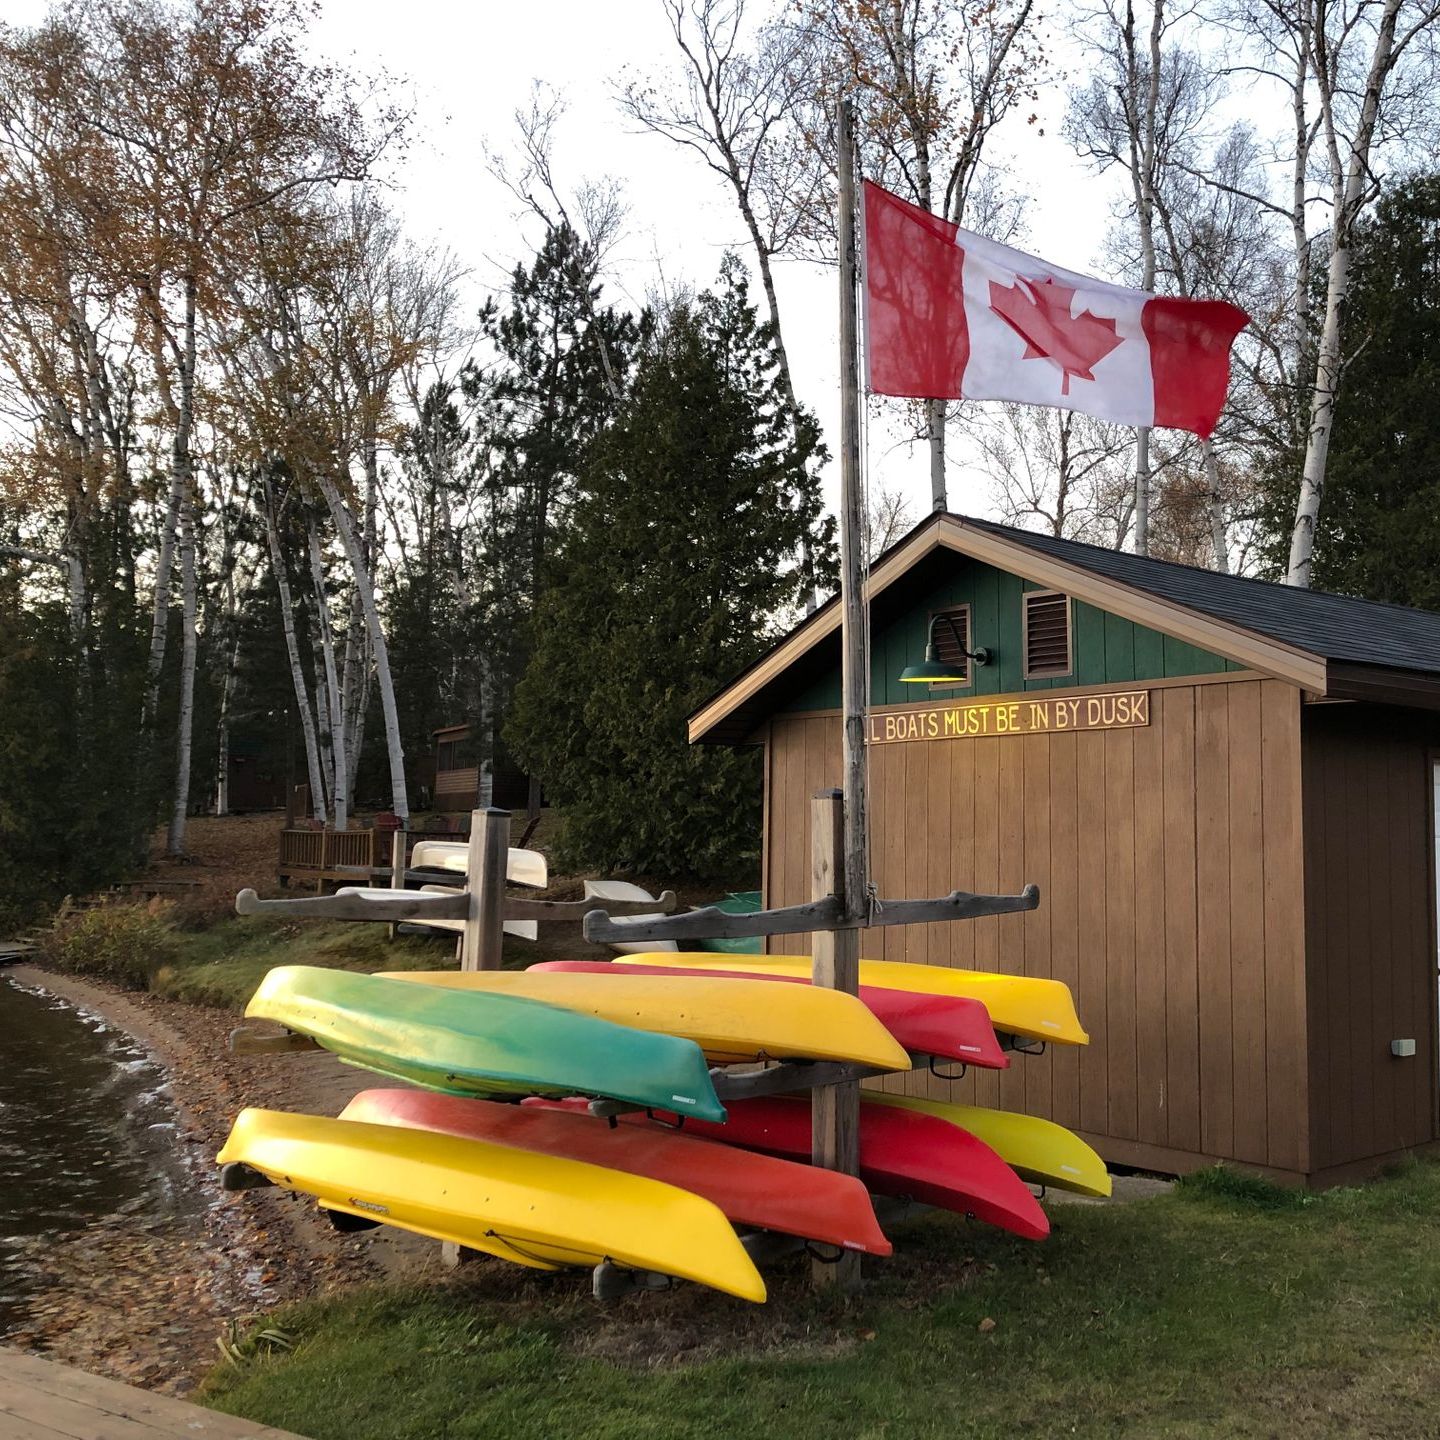 A canadian flag is flying over a row of kayaks